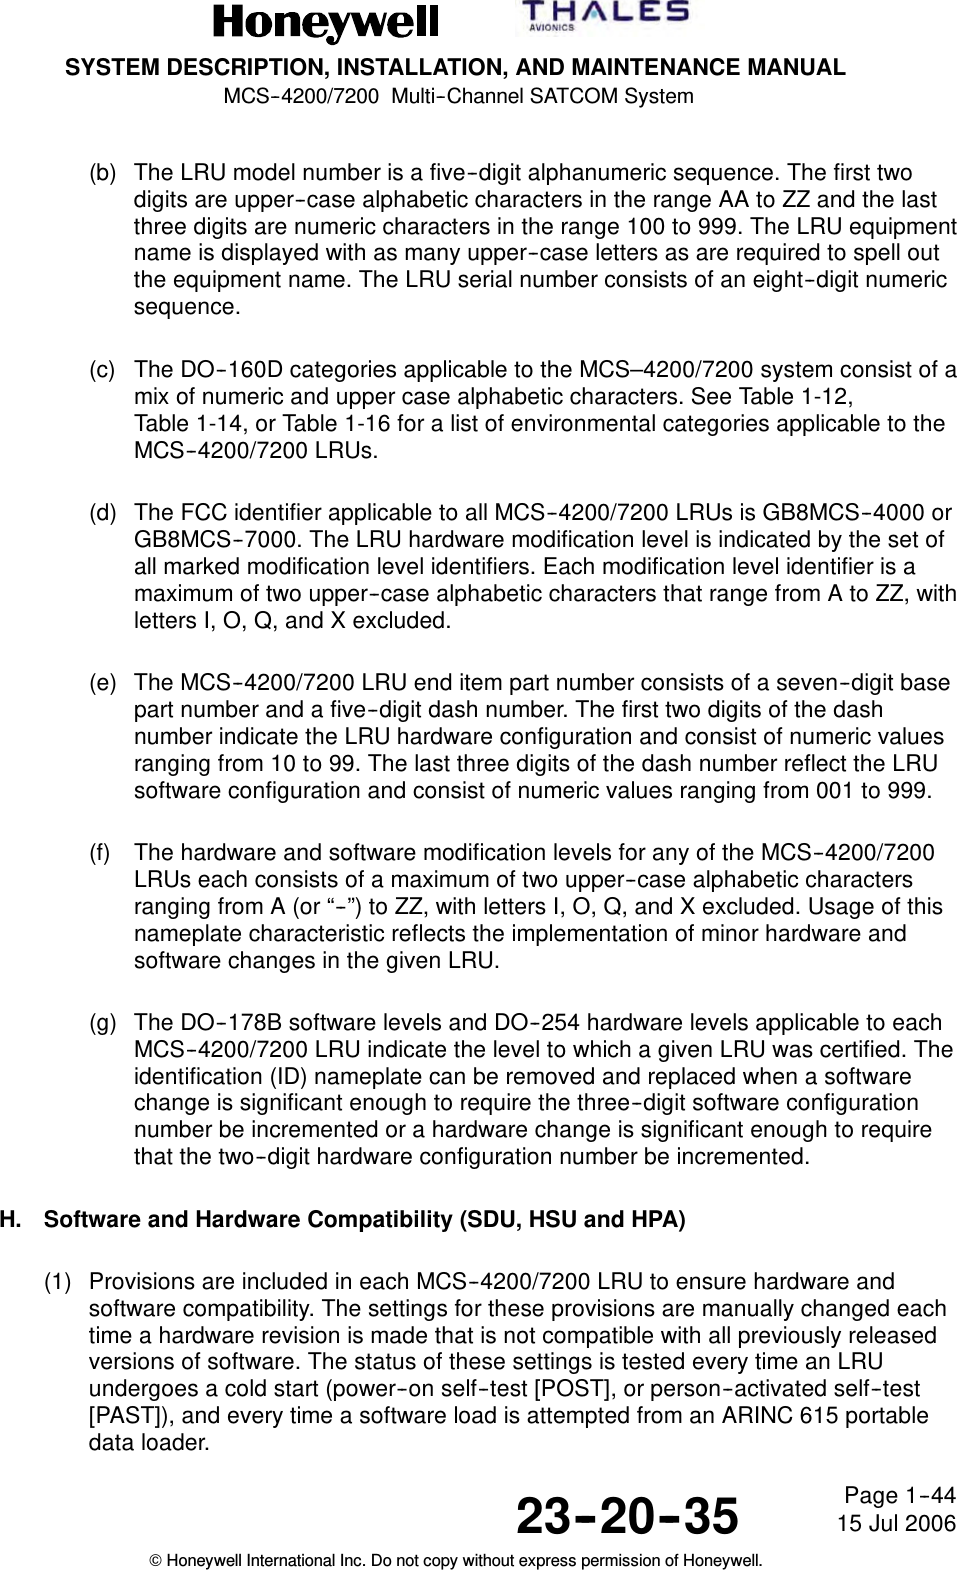 SYSTEM DESCRIPTION, INSTALLATION, AND MAINTENANCE MANUALMCS--4200/7200 Multi--Channel SATCOM System23--20--35 15 Jul 2006Honeywell International Inc. Do not copy without express permission of Honeywell.Page 1--44(b) The LRU model number is a five--digit alphanumeric sequence. The first twodigits are upper--case alphabetic characters in the range AA to ZZ and the lastthree digits are numeric characters in the range 100 to 999. The LRU equipmentname is displayed with as many upper--case letters as are required to spell outthe equipment name. The LRU serial number consists of an eight--digit numericsequence.(c) The DO--160D categories applicable to the MCS–4200/7200 system consist of amix of numeric and upper case alphabetic characters. See Table 1-12,Table 1-14, or Table 1-16 for a list of environmental categories applicable to theMCS--4200/7200 LRUs.(d) The FCC identifier applicable to all MCS--4200/7200 LRUs is GB8MCS--4000 orGB8MCS--7000. The LRU hardware modification level is indicated by the set ofall marked modification level identifiers. Each modification level identifier is amaximum of two upper--case alphabetic characters that range from A to ZZ, withletters I, O, Q, and X excluded.(e) The MCS--4200/7200 LRU end item part number consists of a seven--digit basepart number and a five--digit dash number. The first two digits of the dashnumber indicate the LRU hardware configuration and consist of numeric valuesranging from 10 to 99. The last three digits of the dash number reflect the LRUsoftware configuration and consist of numeric values ranging from 001 to 999.(f) The hardware and software modification levels for any of the MCS--4200/7200LRUs each consists of a maximum of two upper--case alphabetic charactersranging from A (or “--”) to ZZ, with letters I, O, Q, and X excluded. Usage of thisnameplate characteristic reflects the implementation of minor hardware andsoftware changes in the given LRU.(g) The DO--178B software levels and DO--254 hardware levels applicable to eachMCS--4200/7200 LRU indicate the level to which a given LRU was certified. Theidentification (ID) nameplate can be removed and replaced when a softwarechange is significant enough to require the three--digit software configurationnumber be incremented or a hardware change is significant enough to requirethat the two--digit hardware configuration number be incremented.H. Software and Hardware Compatibility (SDU, HSU and HPA)(1) Provisions are included in each MCS--4200/7200 LRU to ensure hardware andsoftware compatibility. The settings for these provisions are manually changed eachtime a hardware revision is made that is not compatible with all previously releasedversions of software. The status of these settings is tested every time an LRUundergoes a cold start (power--on self--test [POST], or person--activated self--test[PAST]), and every time a software load is attempted from an ARINC 615 portabledata loader.